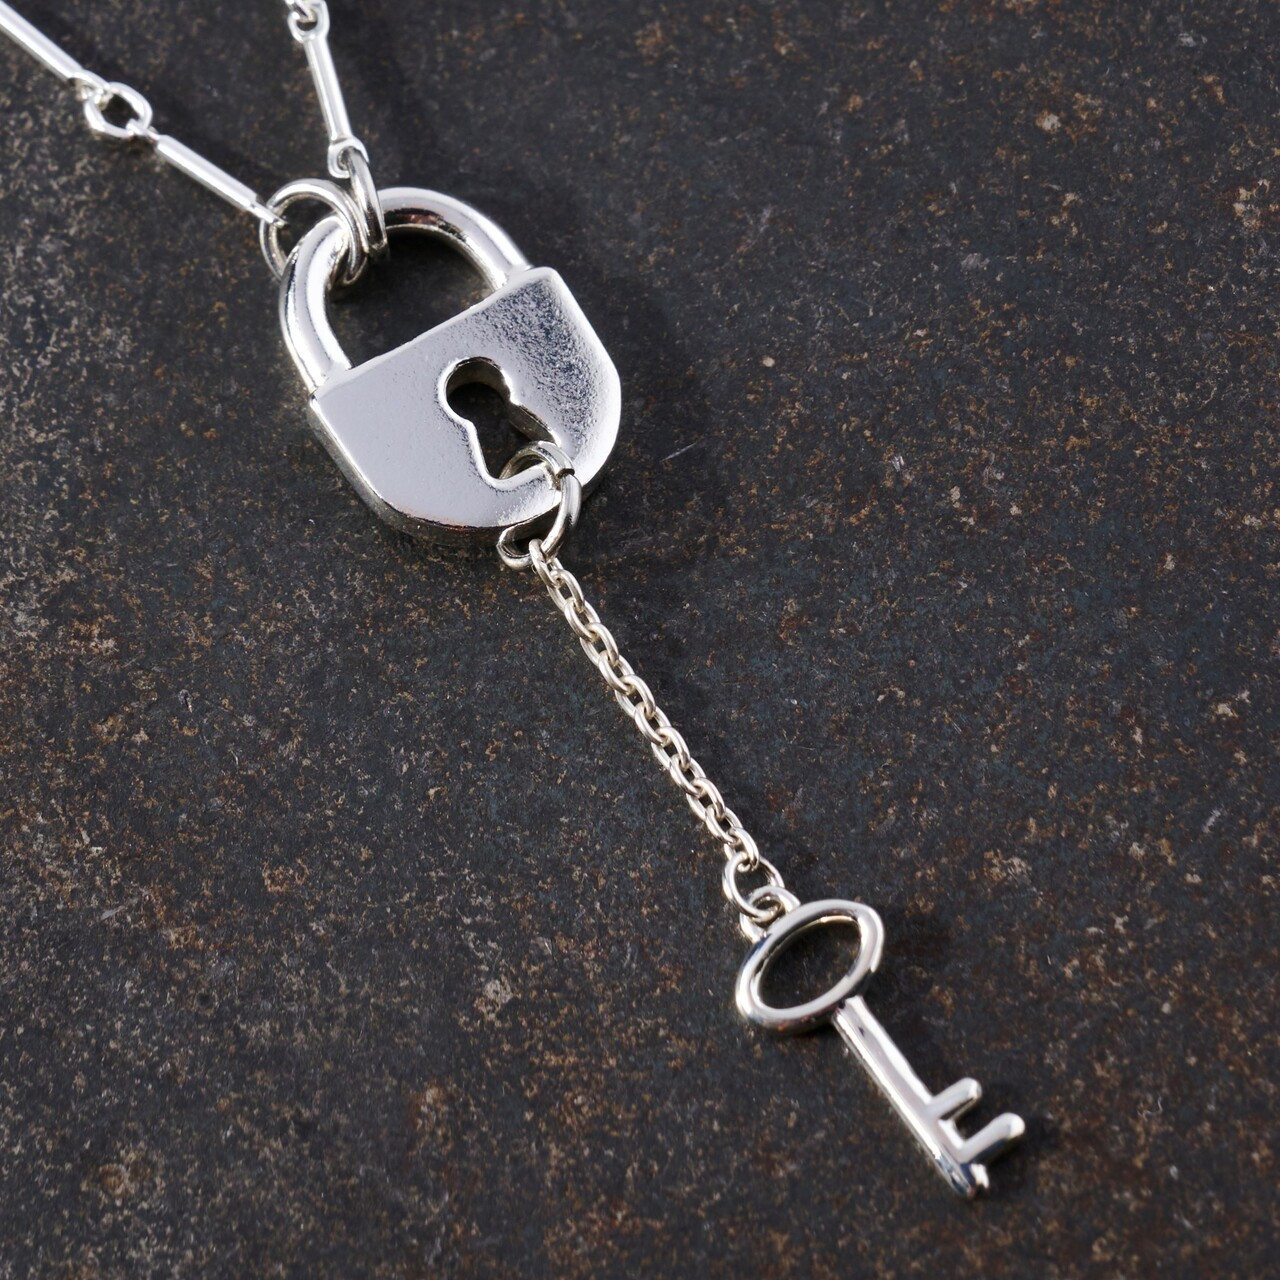 Sarah Personalized Lock and Key Necklace Sterling Silver Pendant with Sterling Silver Chain / 20